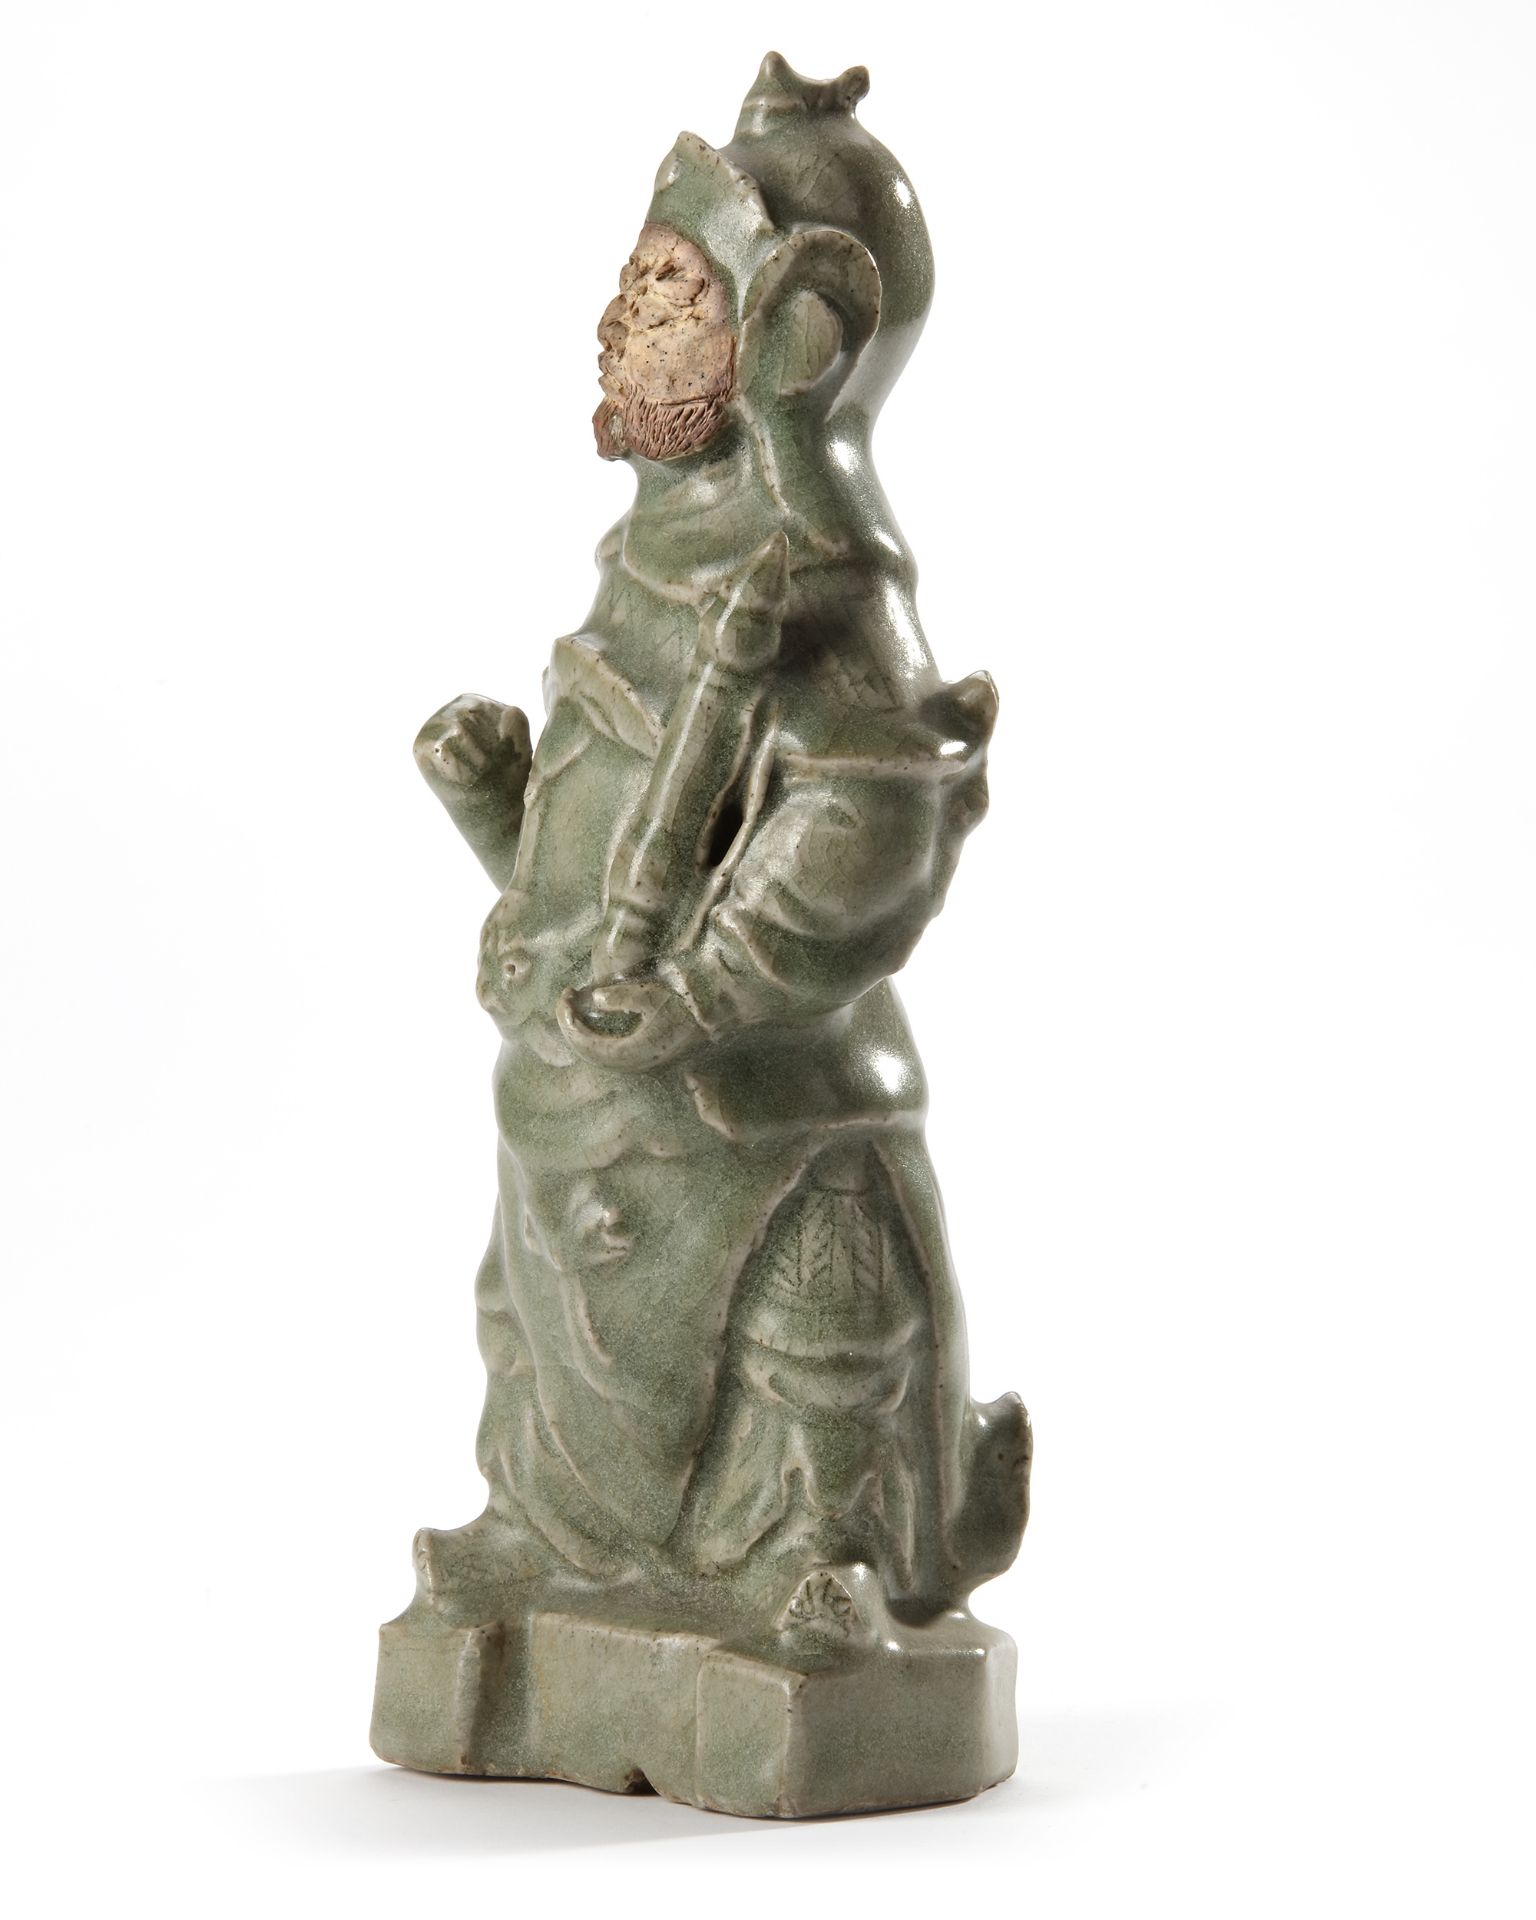 A CHINESE CELADON GUAN YU FIGURE, MING DYNASTY, 15TH CENTURY - Image 2 of 6